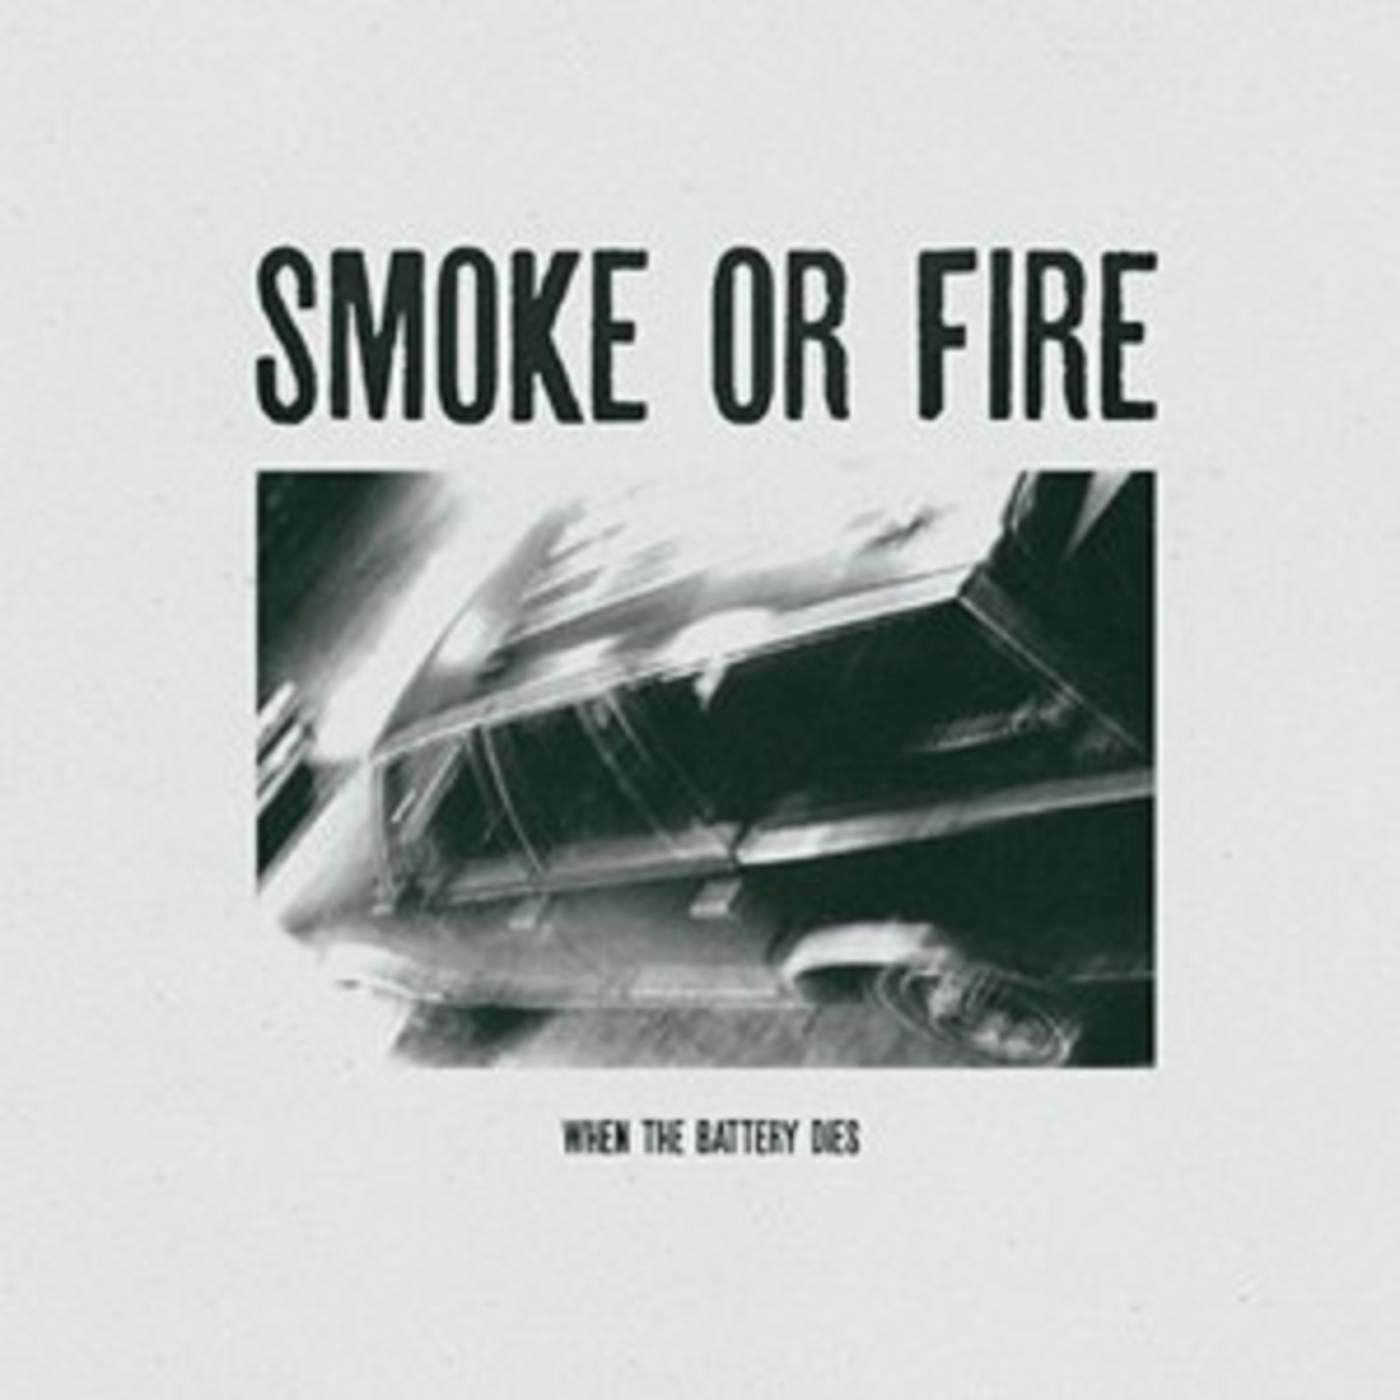 Smoke Or Fire When the Battery Dies Vinyl Record